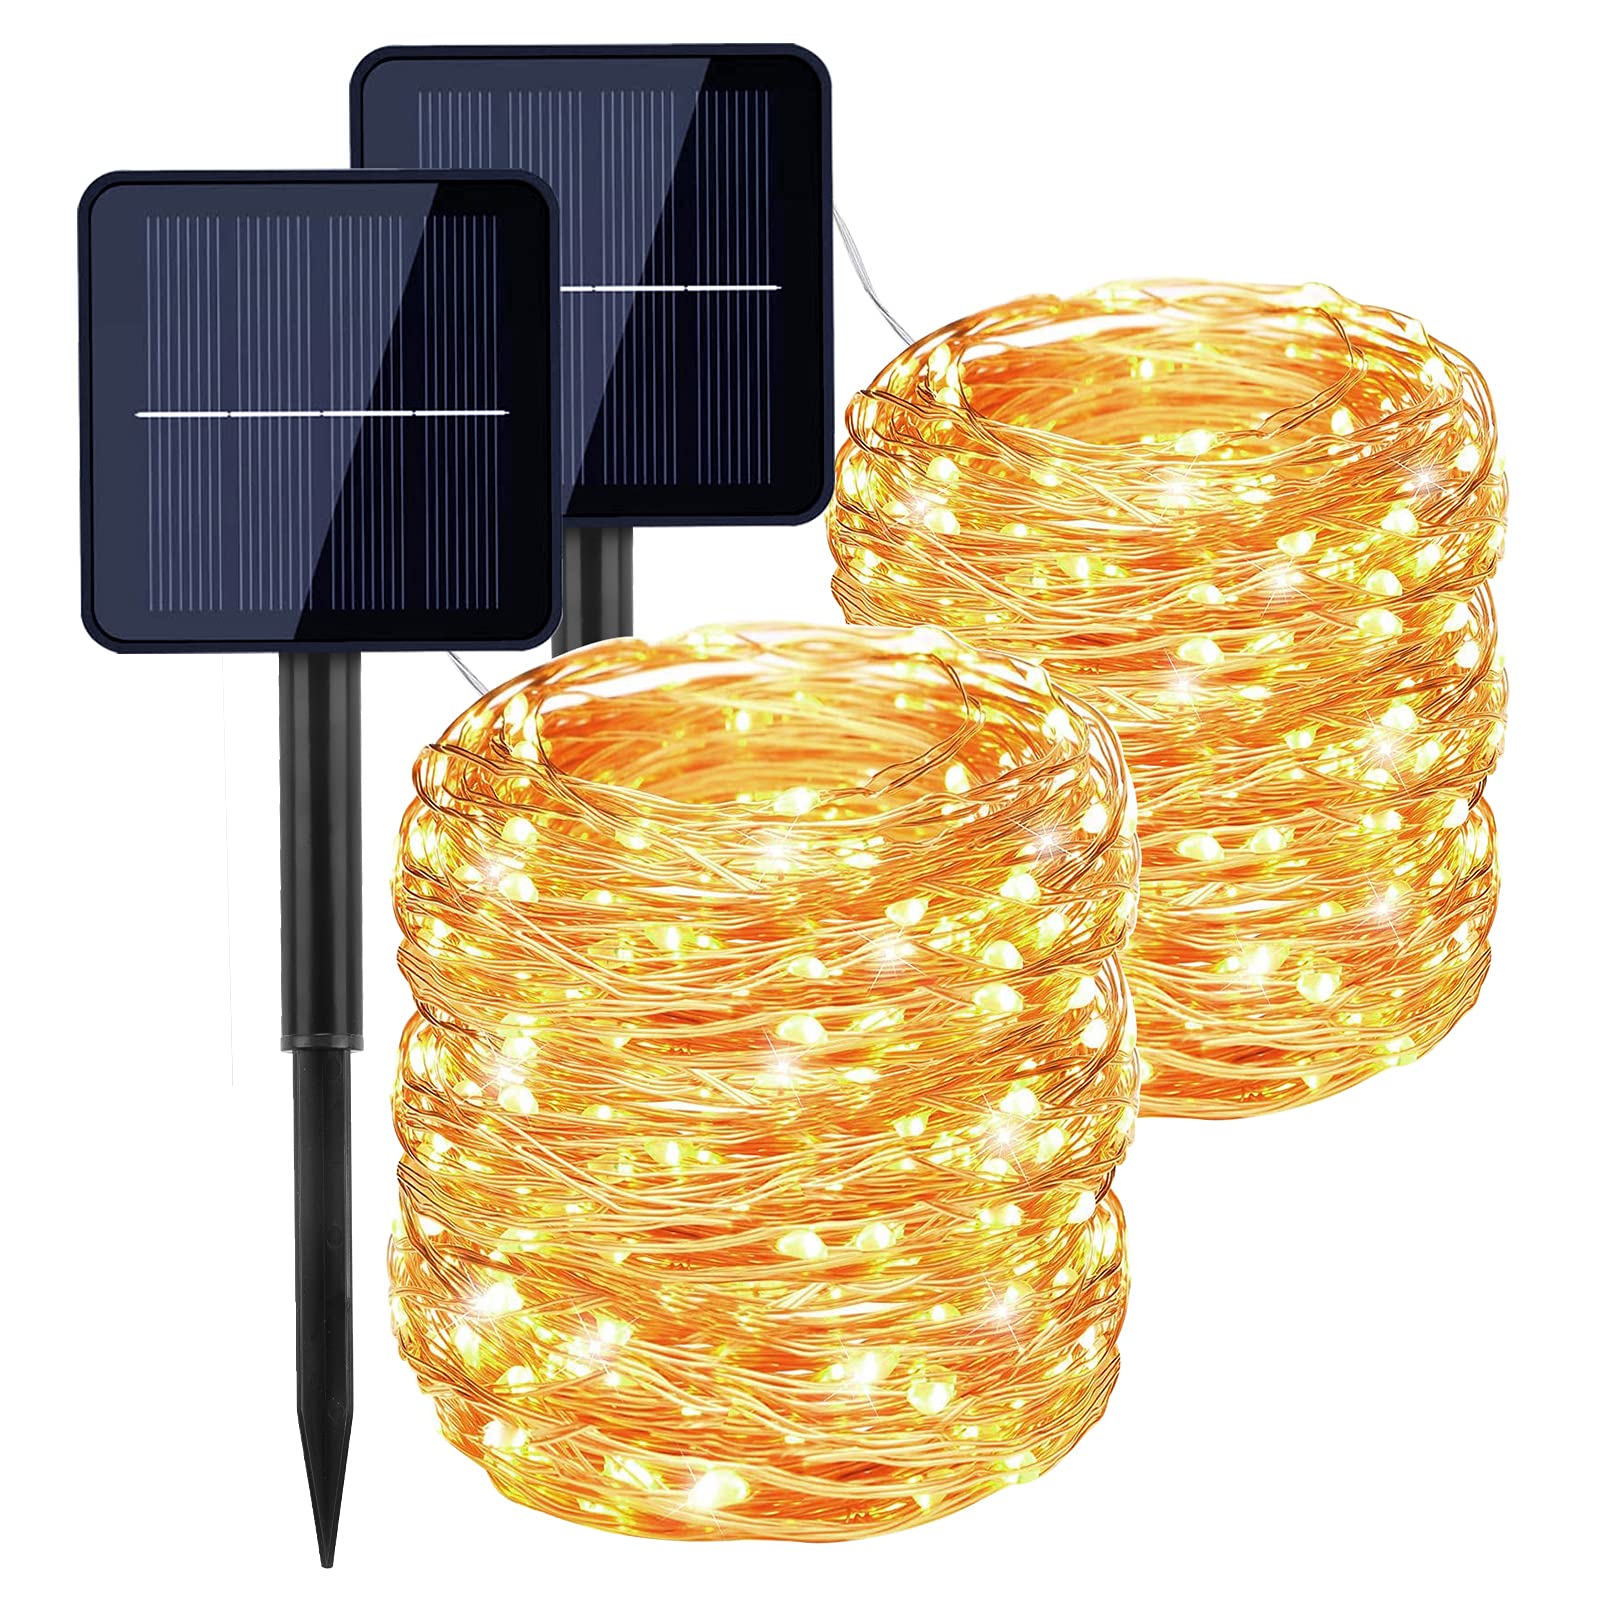 Solar String Lights Outdoor, 2 Pack 22m 200 LED Solar Fairy Lights 8 Modes Christmas Lights, Solar Fairy Lights for Garden Yard Home Decor Party Wedding Halloween Christmas Decoration Warm White